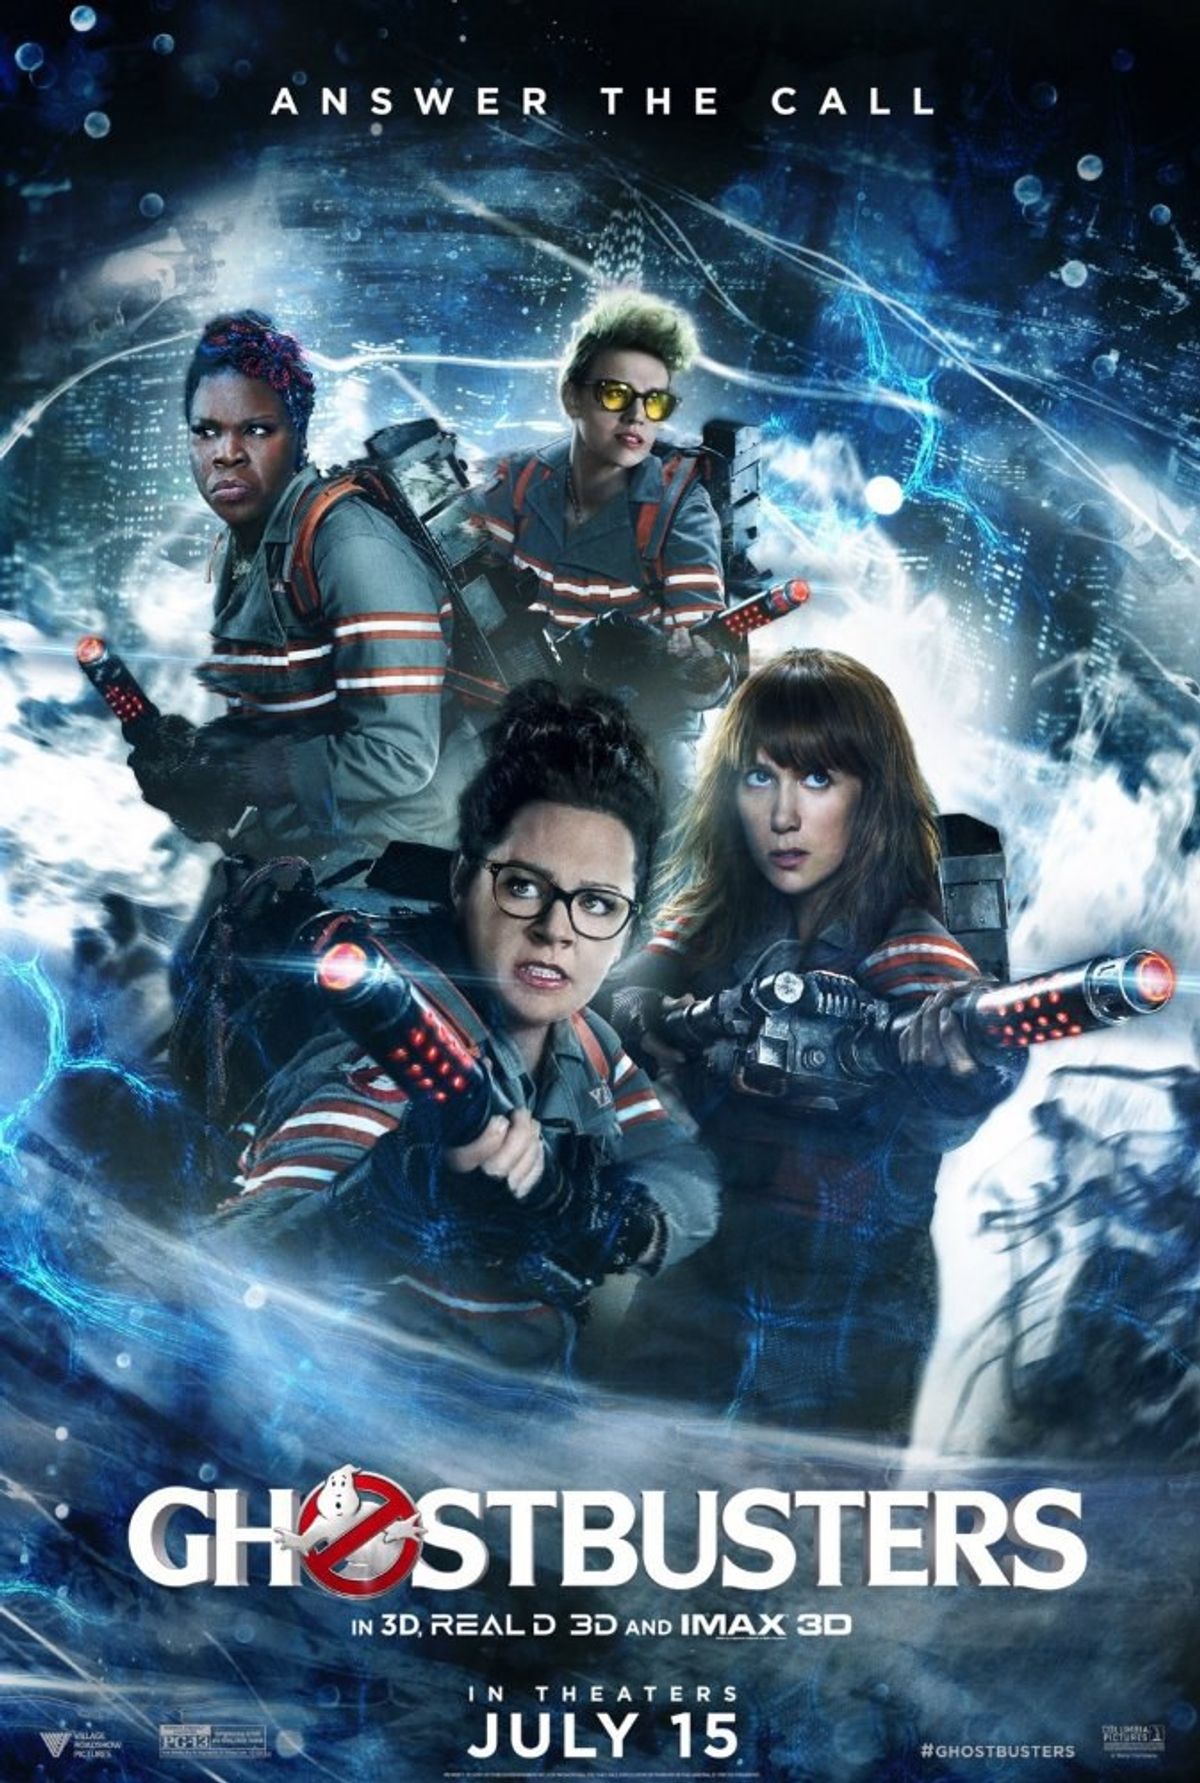 Why You Need To Watch 2016's "Ghostbusters" Remake